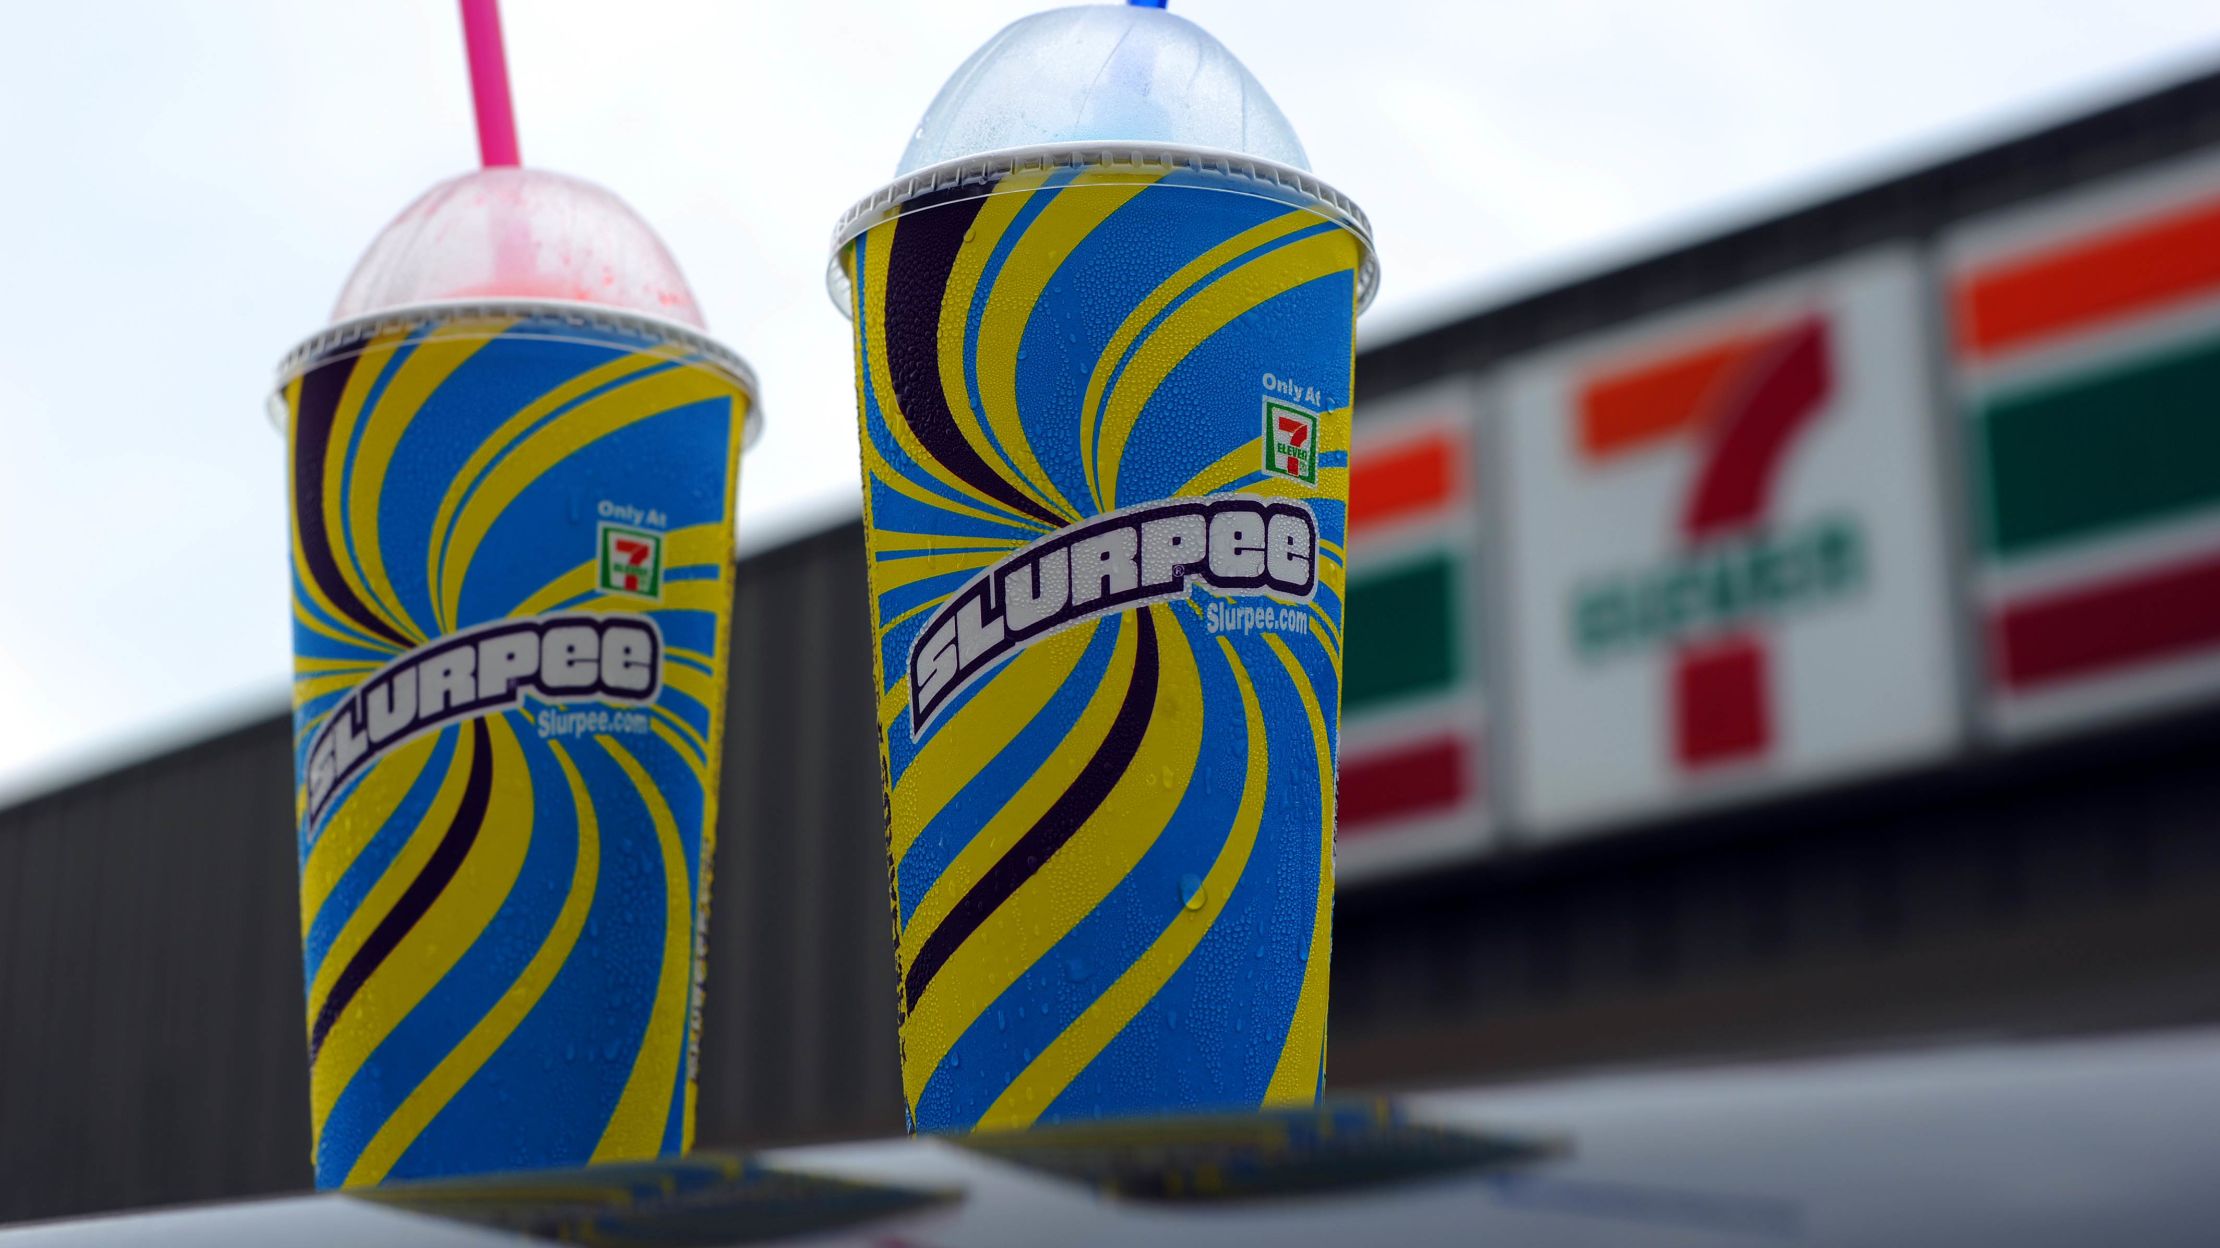 11 Facts About 7 Eleven On 7 11 Mental Floss